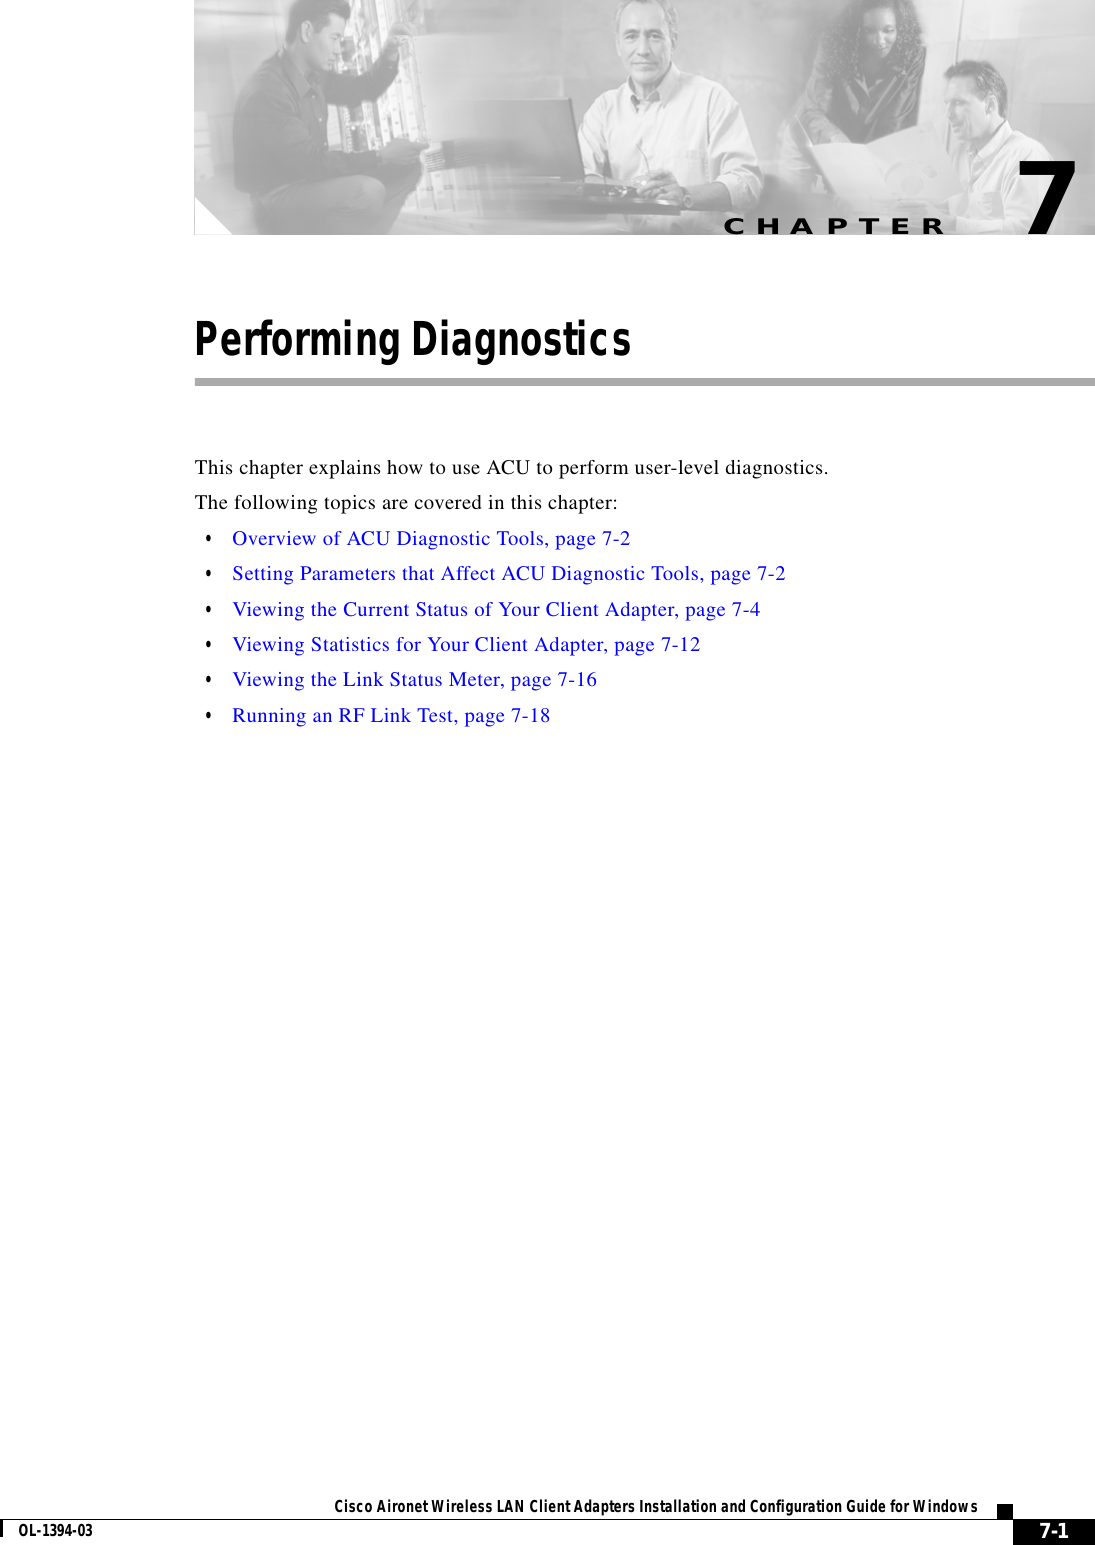 CHAPTER7-1Cisco Aironet Wireless LAN Client Adapters Installation and Configuration Guide for WindowsOL-1394-037Performing DiagnosticsThis chapter explains how to use ACU to perform user-level diagnostics.The following topics are covered in this chapter:•Overview of ACU Diagnostic Tools, page 7-2•Setting Parameters that Affect ACU Diagnostic Tools, page 7-2•Viewing the Current Status of Your Client Adapter, page 7-4•Viewing Statistics for Your Client Adapter, page 7-12•Viewing the Link Status Meter, page 7-16•Running an RF Link Test, page 7-18